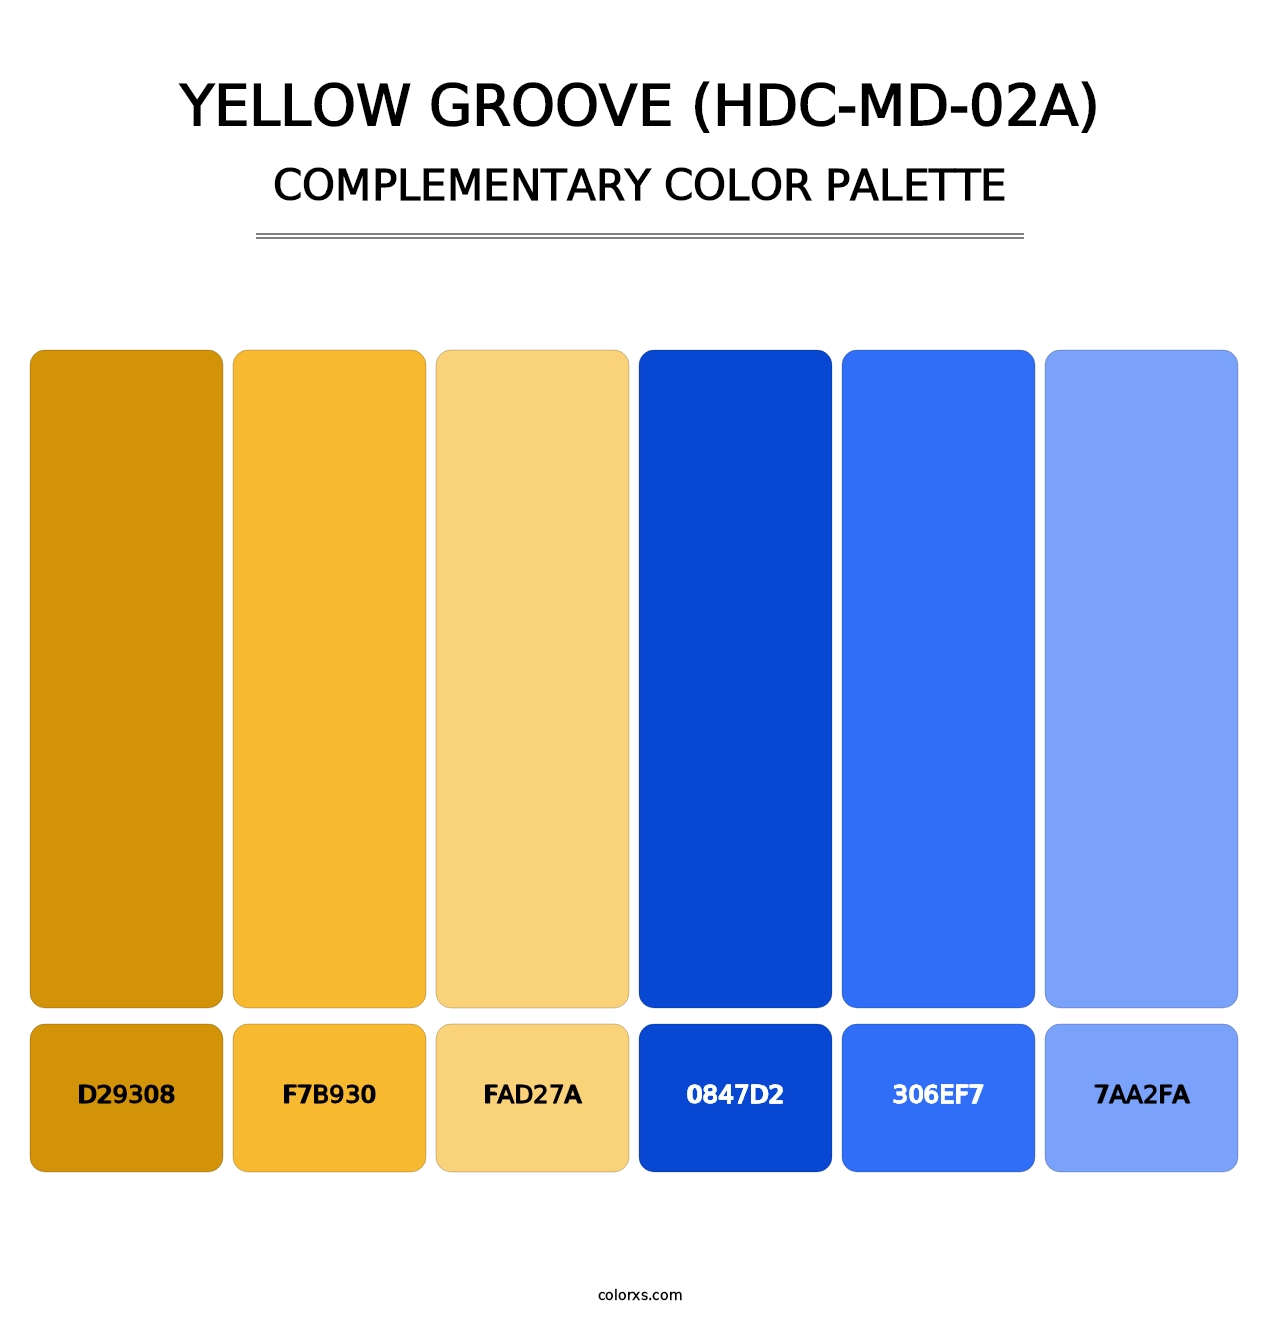 Yellow Groove (HDC-MD-02A) - Complementary Color Palette